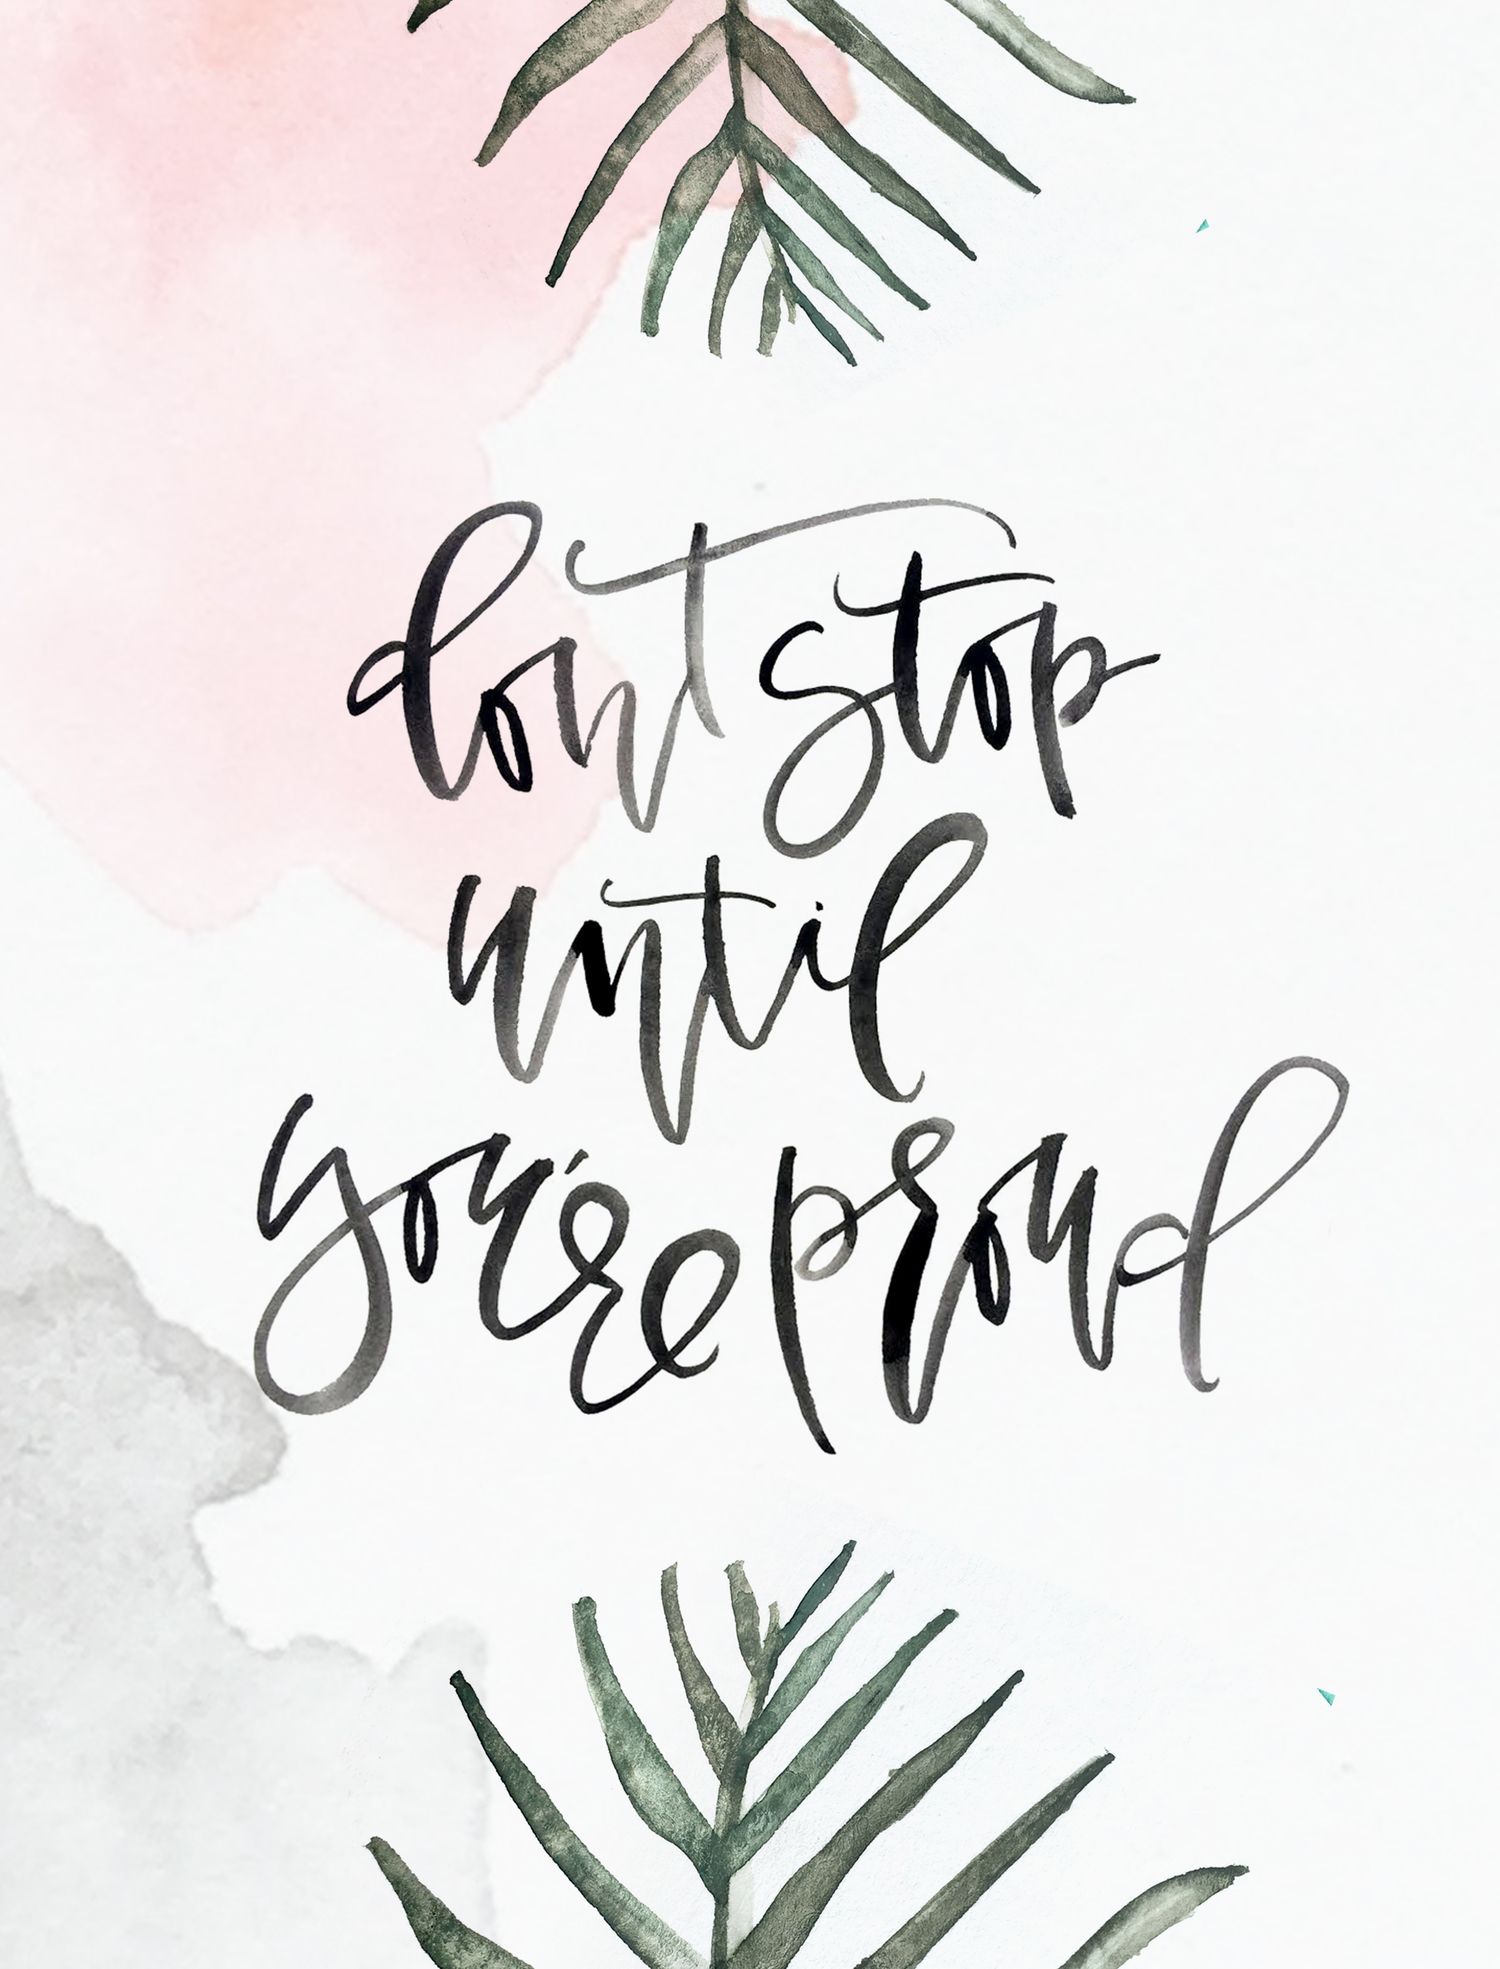 A quote that says don't stop until you get there - Calligraphy